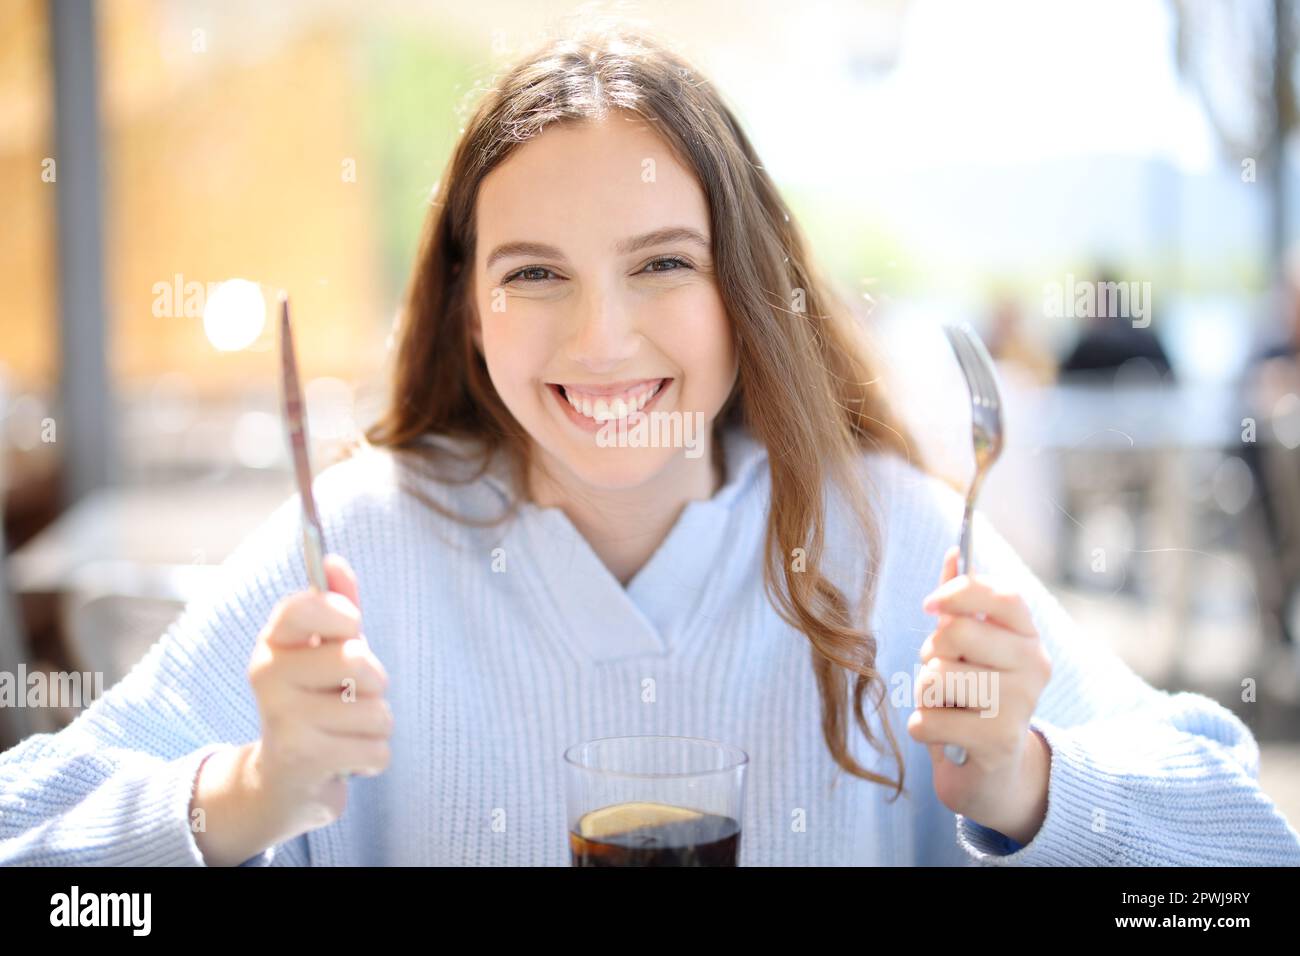 Front view of a happy restaurant customer ready to eat looking at camera Stock Photo